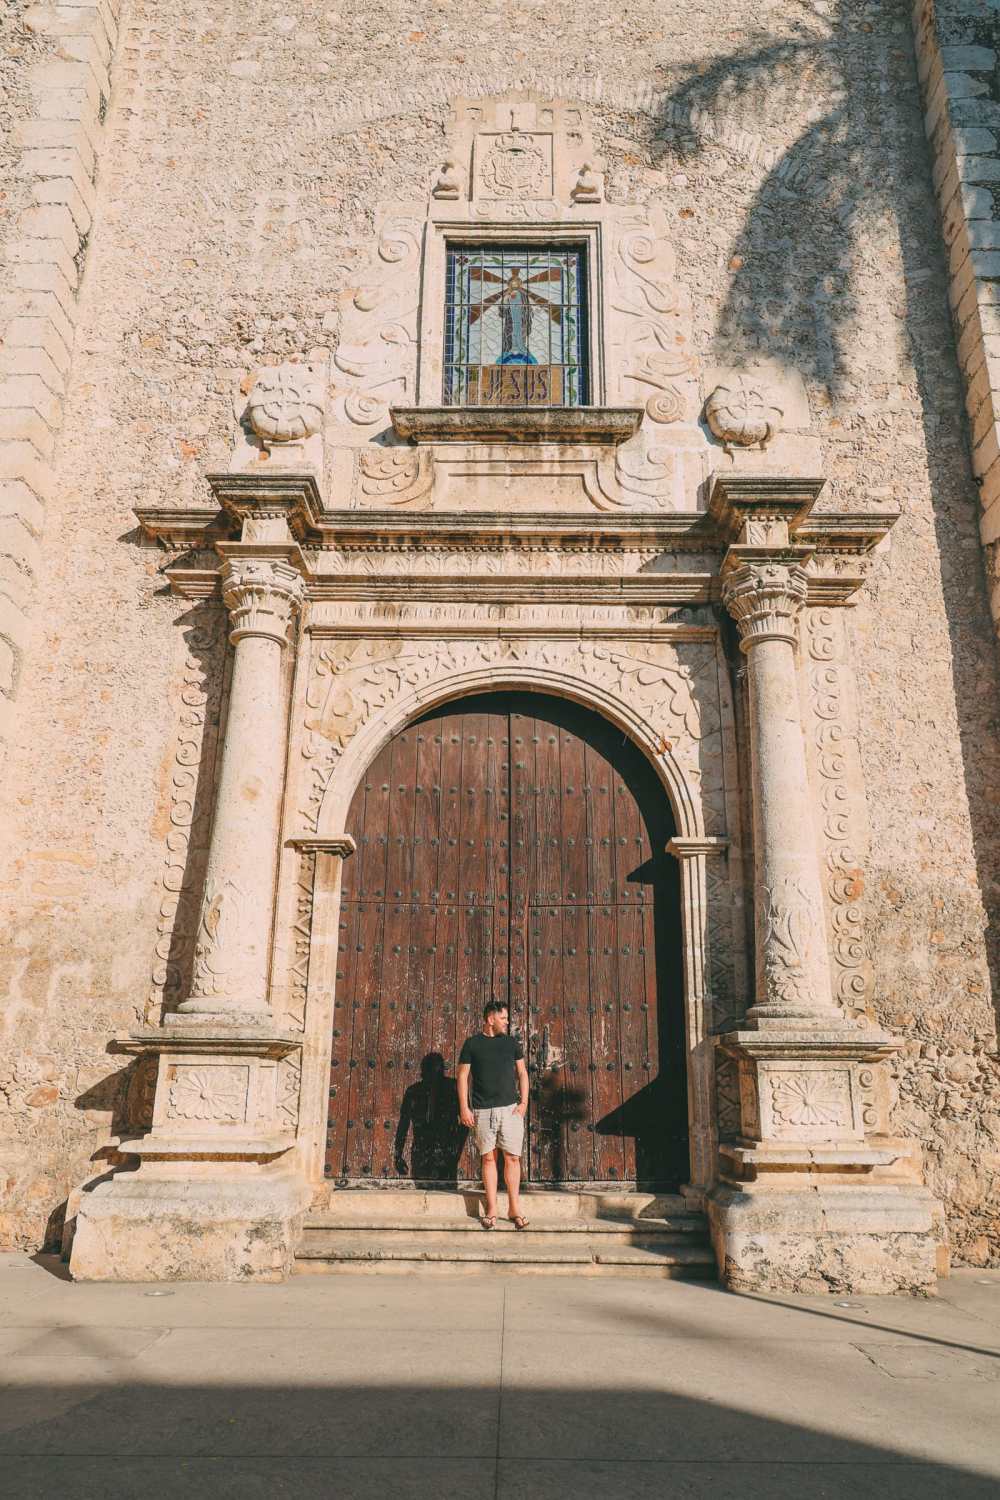 These Are The Best Places To Visit In Merida, Mexico